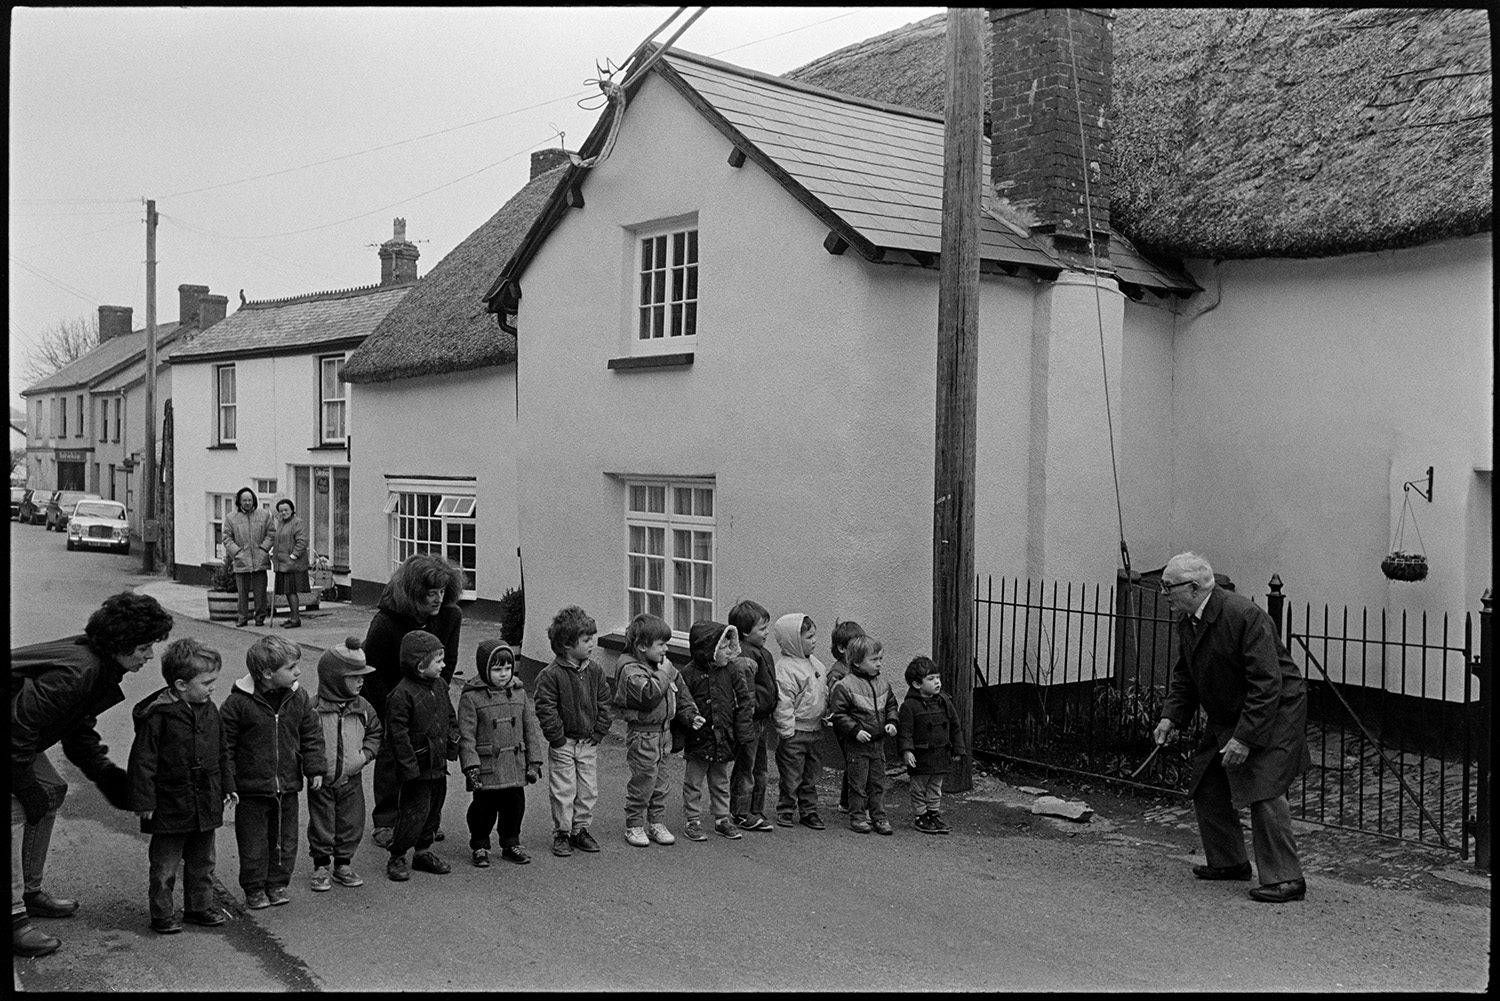 Shrove Tuesday Pancake Race in village street, children's races.
[Thirteen young children lined up across Fore Street, Dolton, dressed in winter clothes, getting ready for a race in the Shrove Tuesday pancake day celebrations. A man and two women are starting the race. In the background a man and woman are stood outside the Post Office watching.]